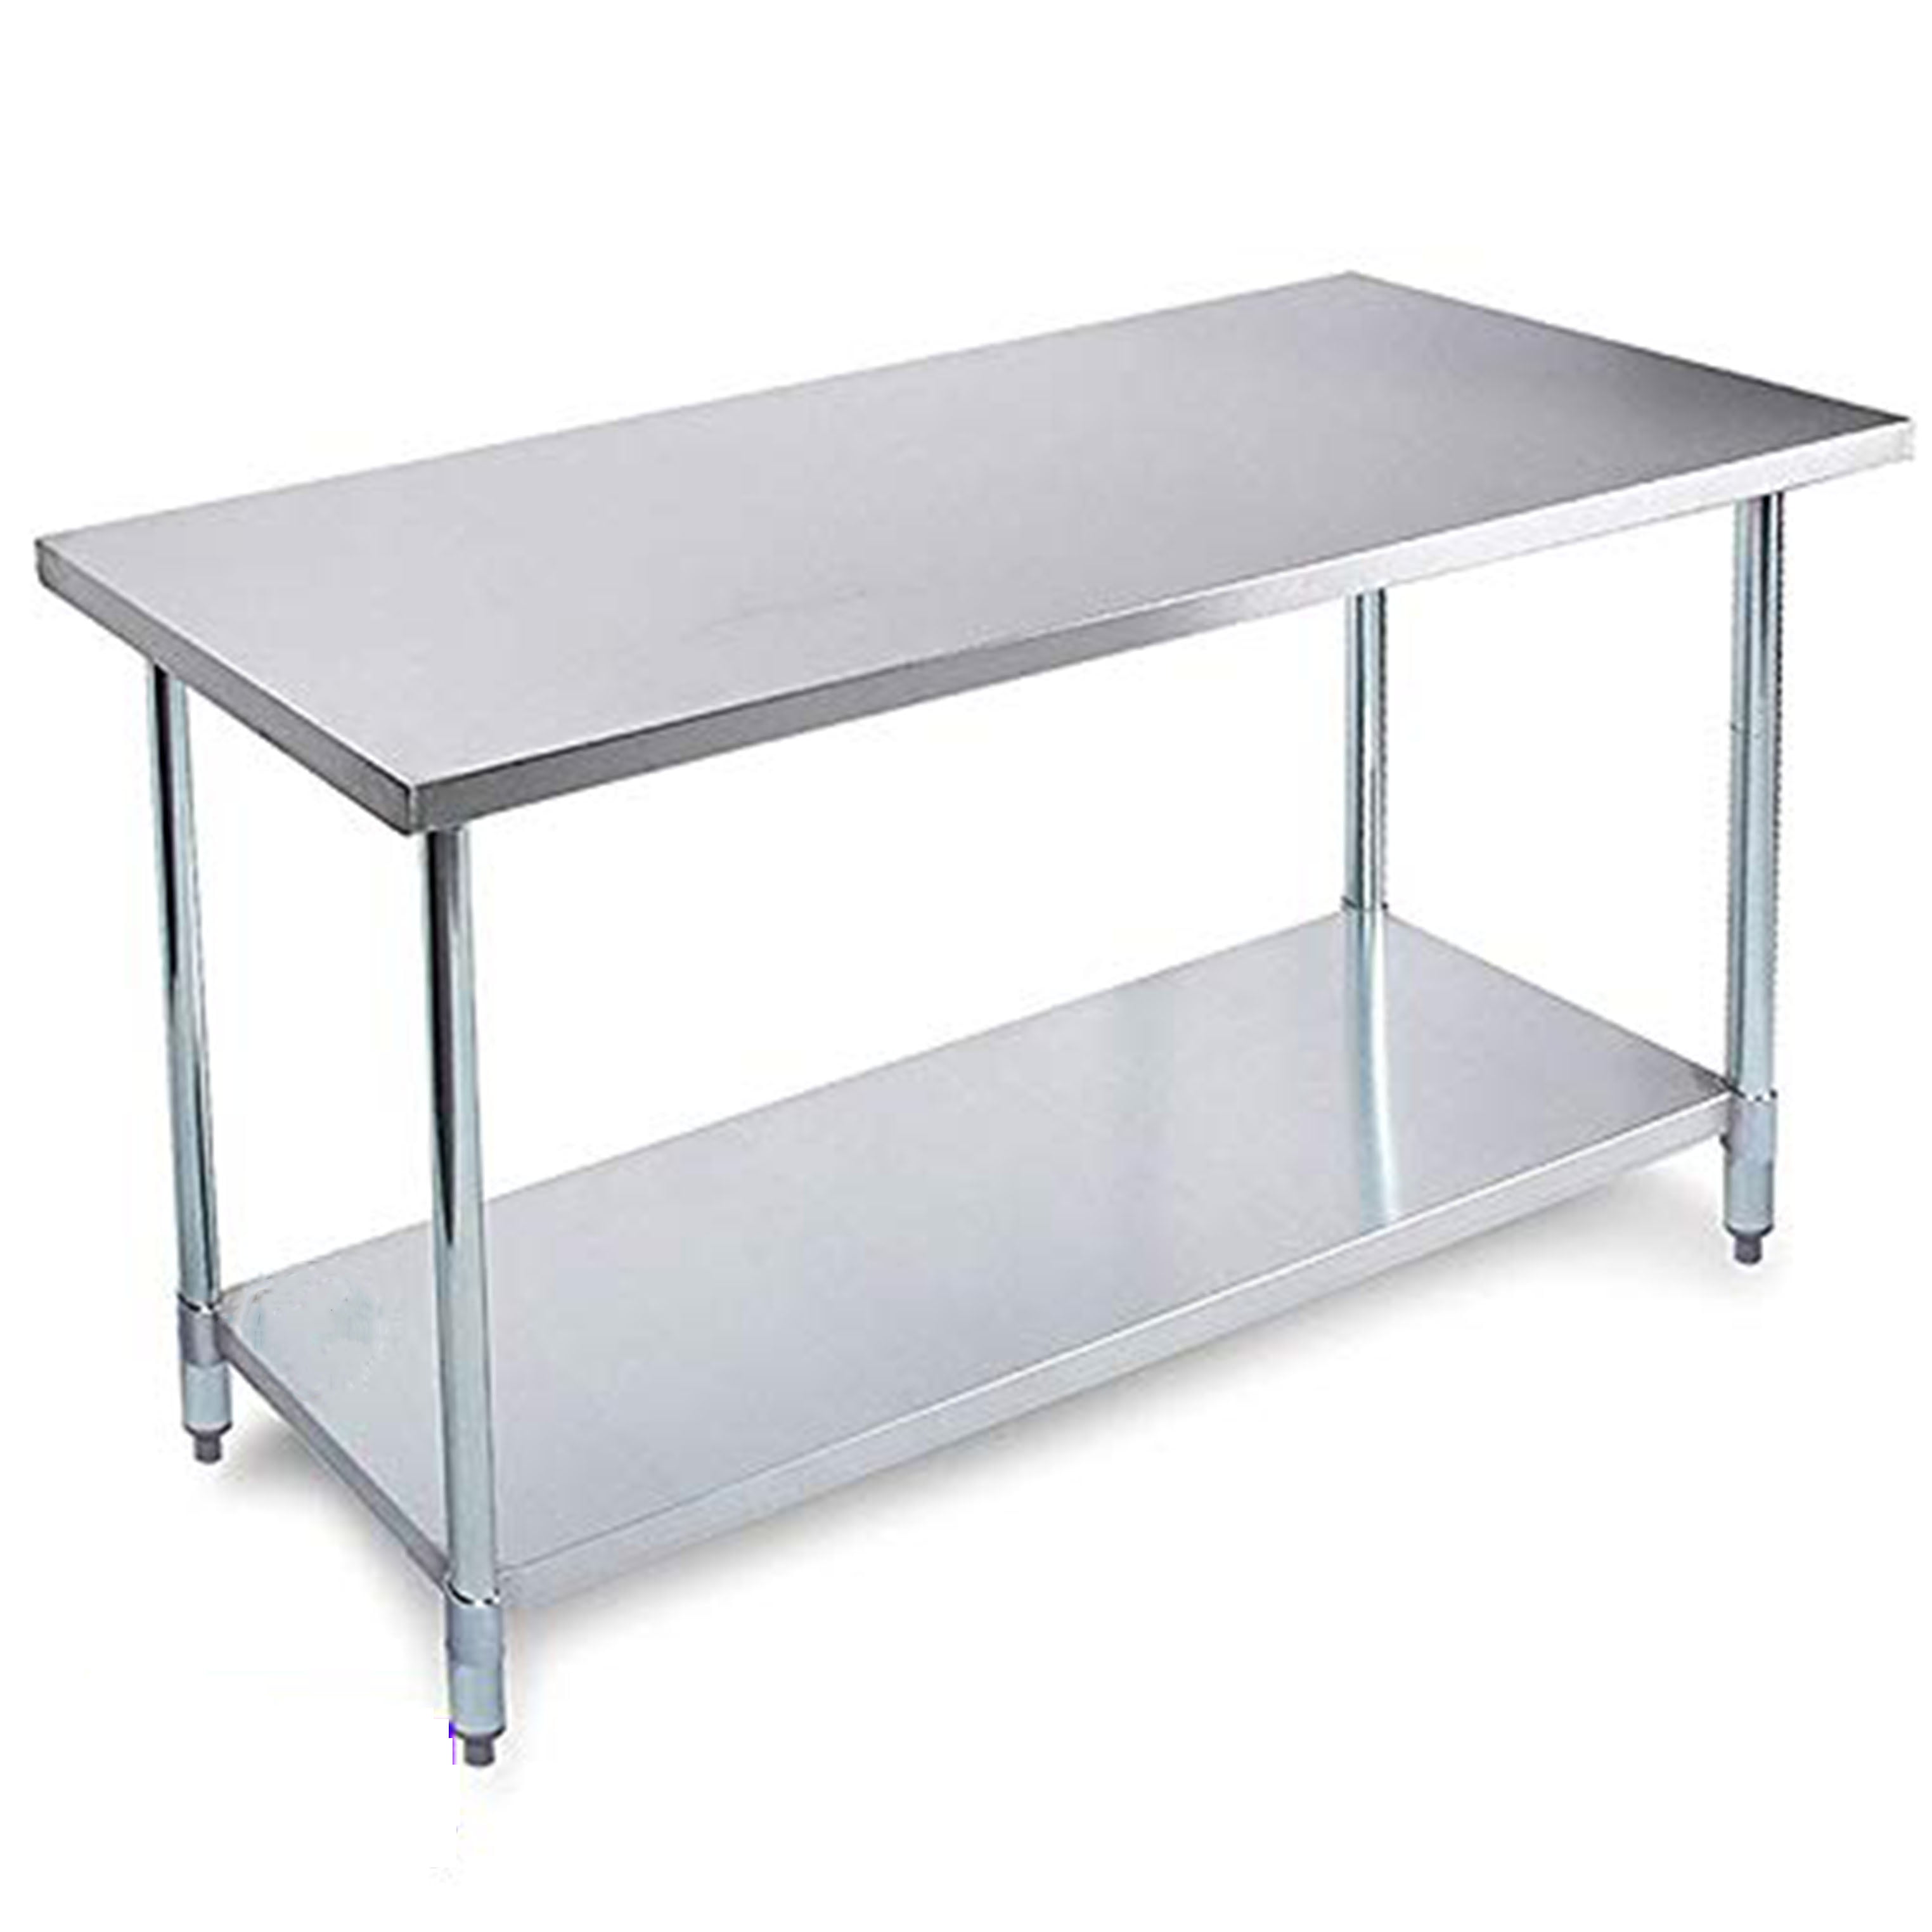 Details about   18 Gauge 430 Stainless Steel Work Table with Undershelf and 2"  Rear Upturn 